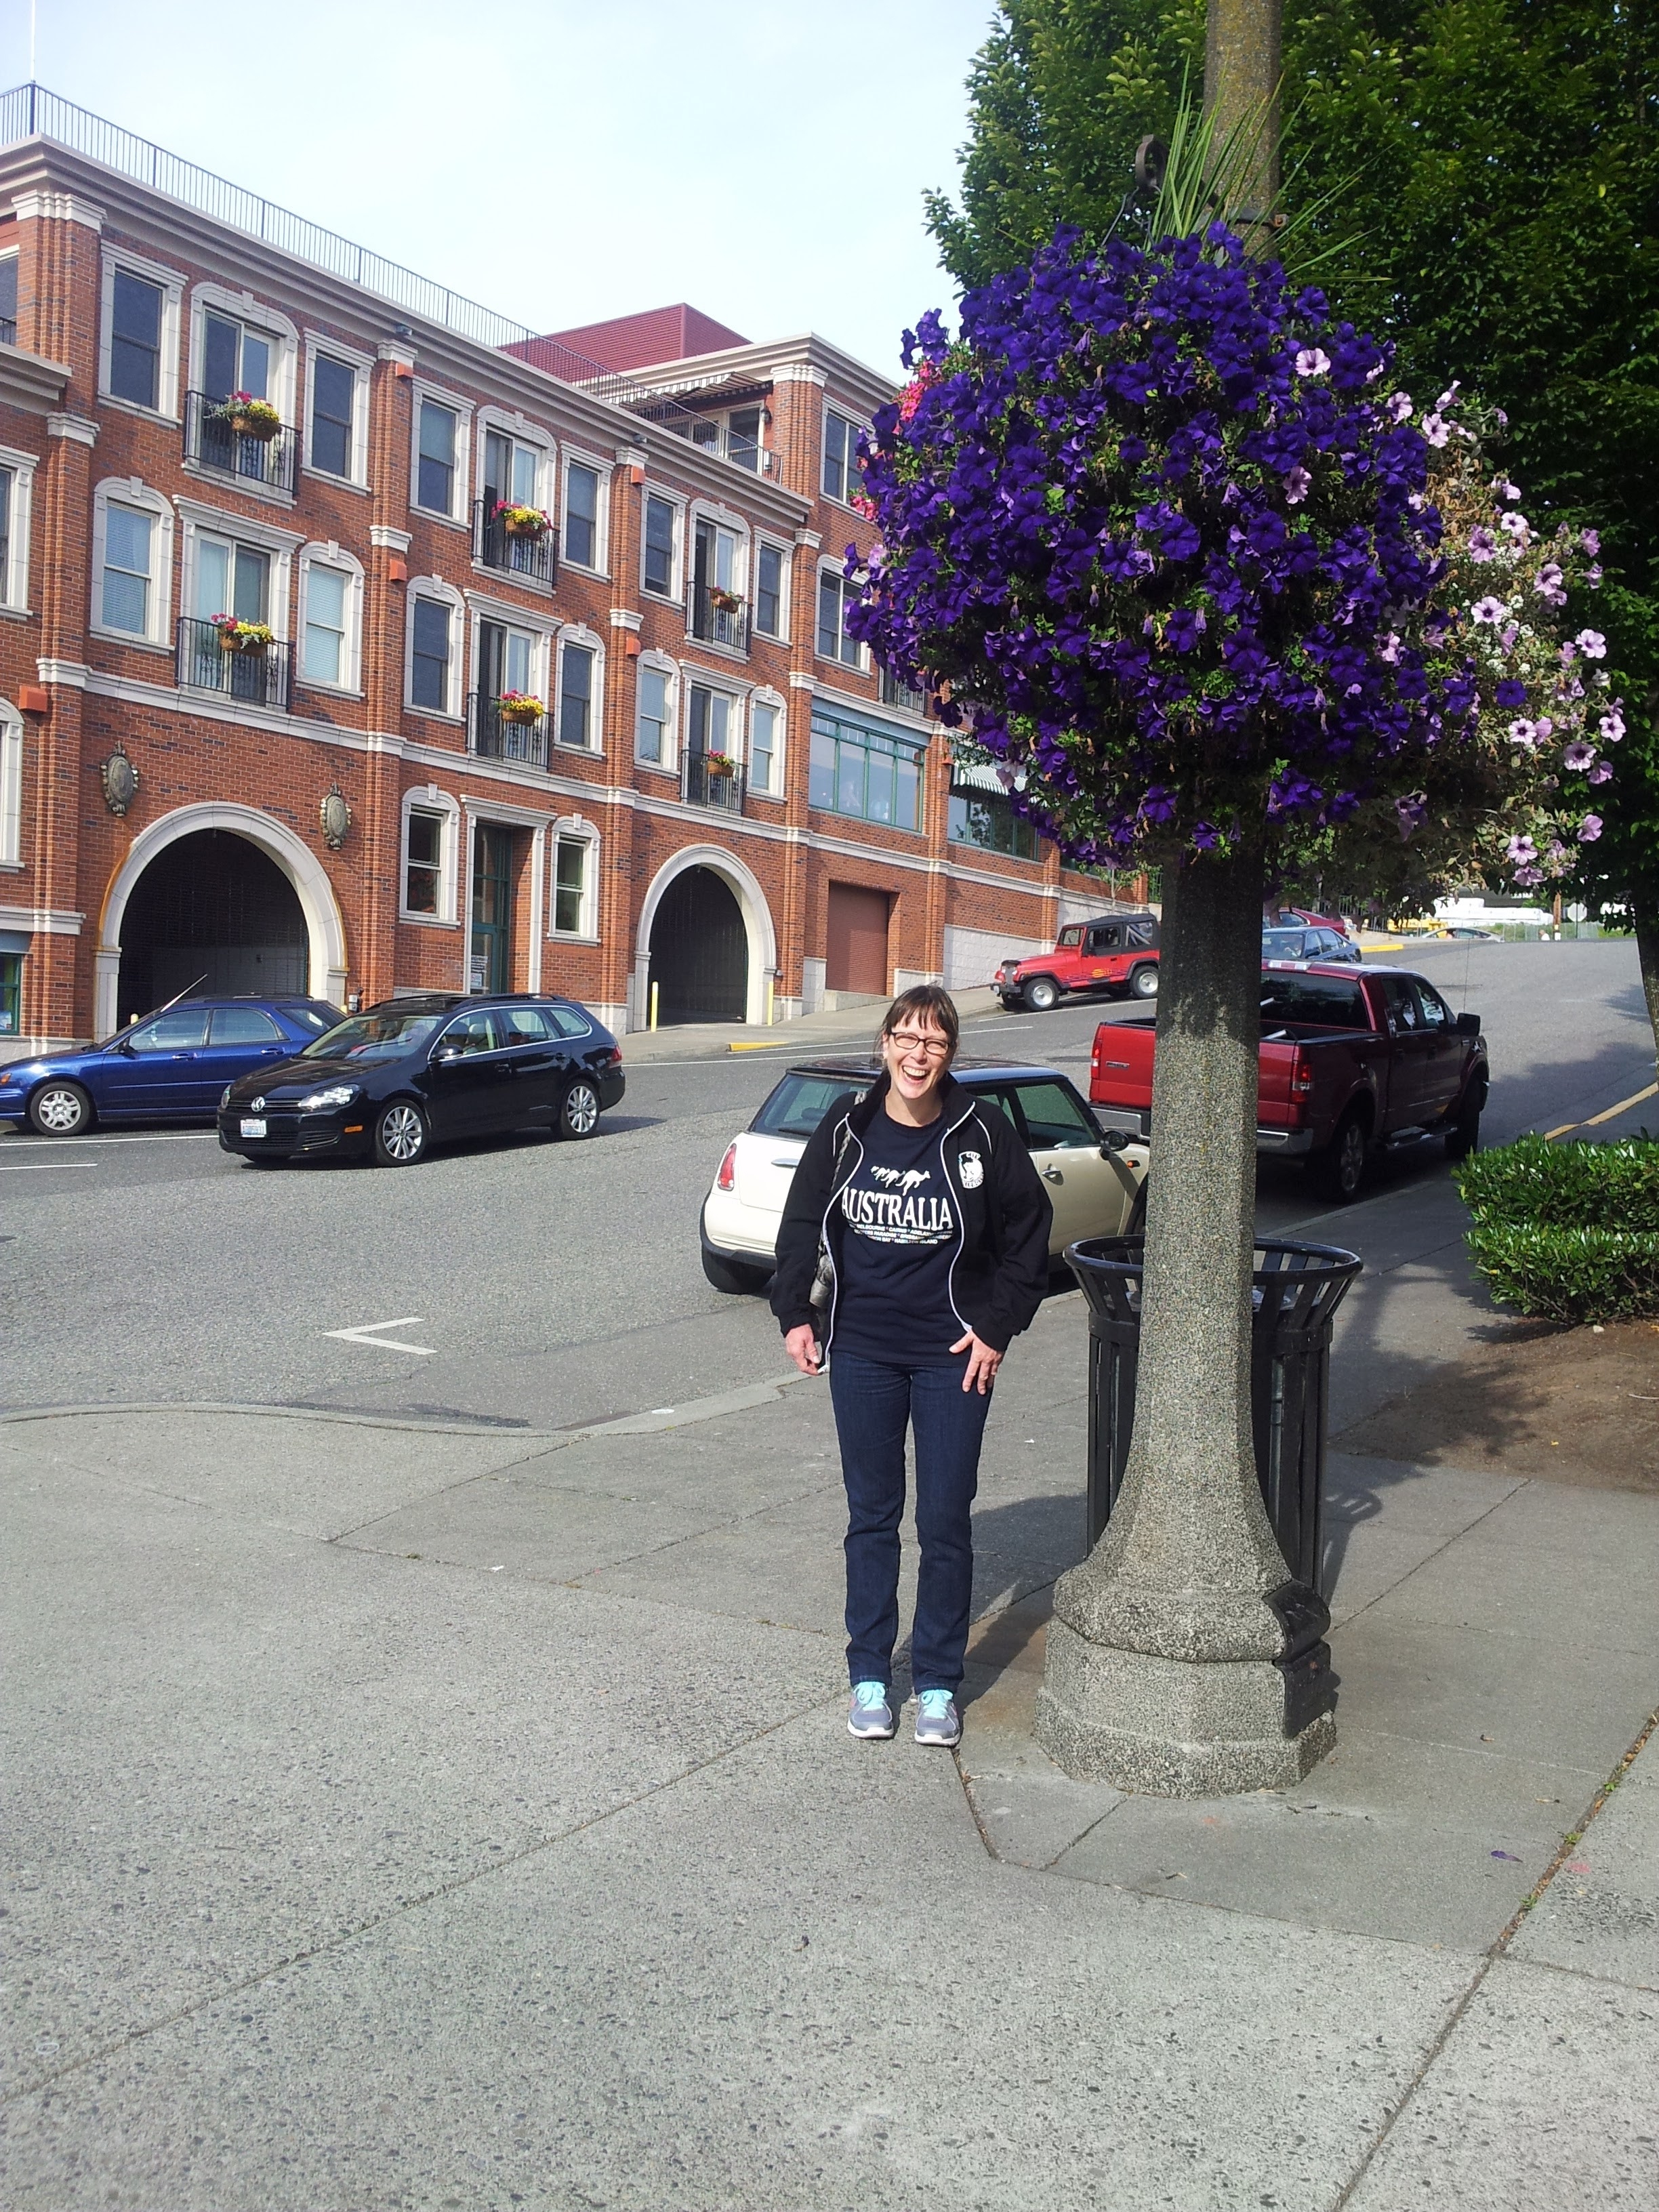  On a visit to one of our favorite cities, Bellingham, WA. 